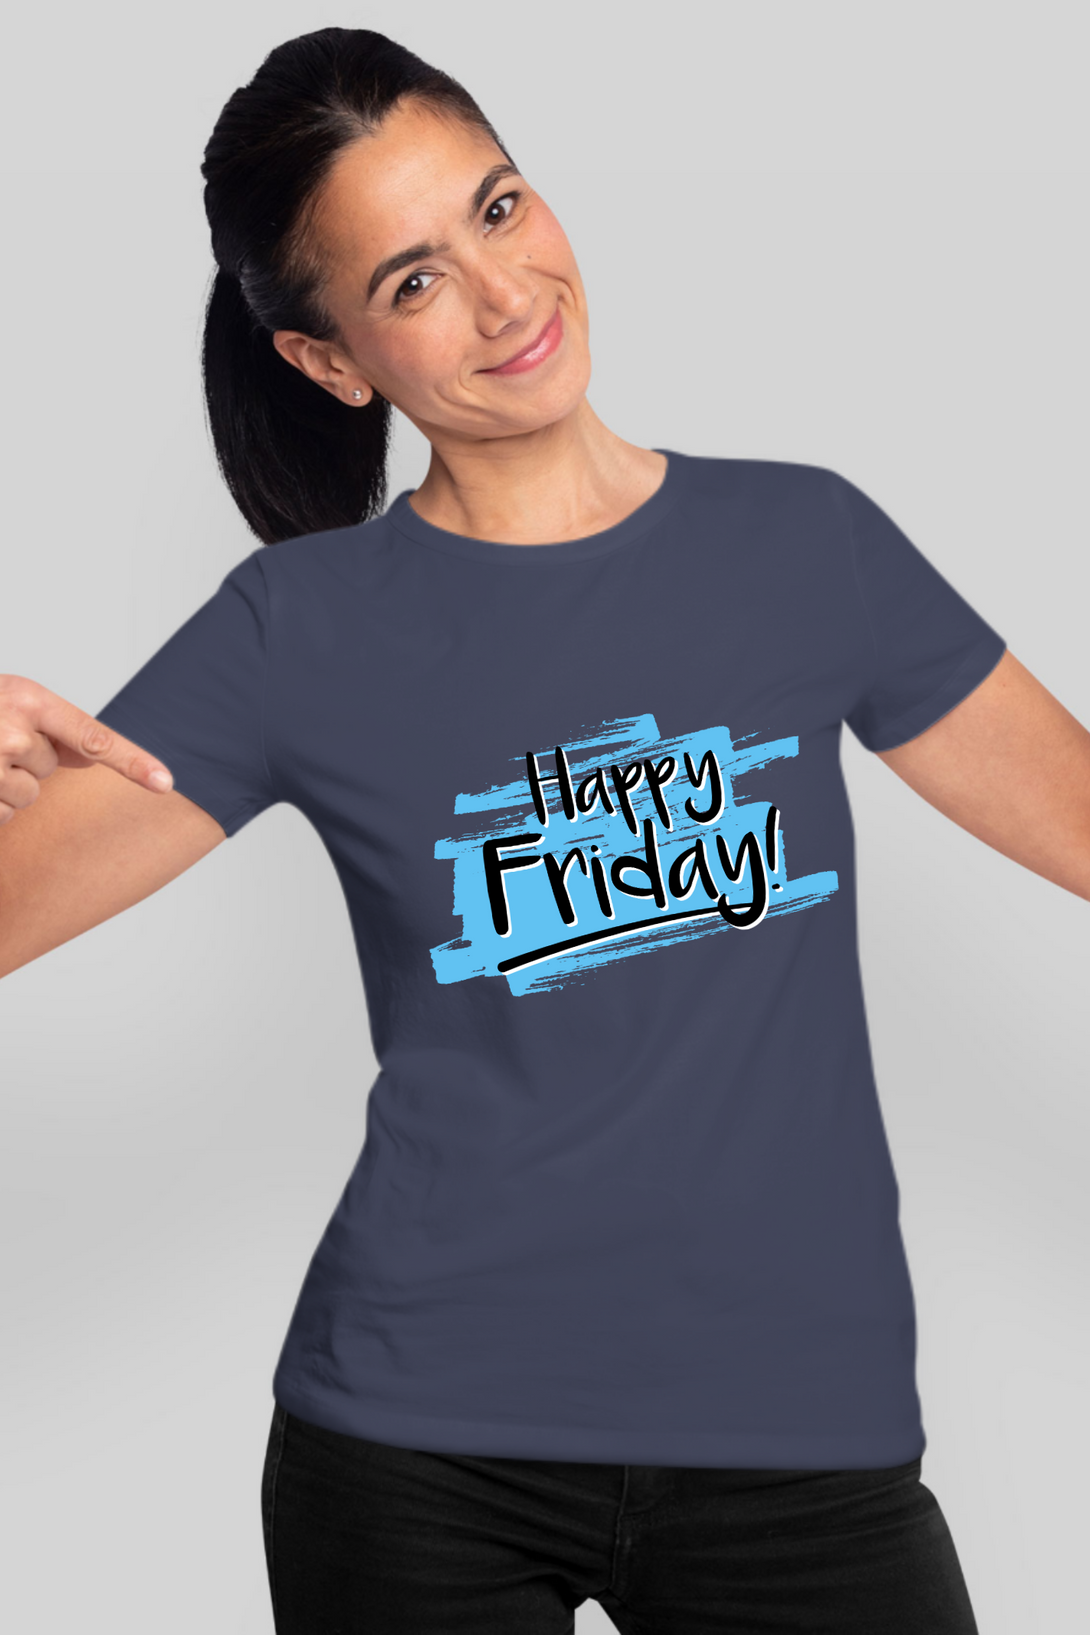 Happy Friday Printed T-Shirt For Women - WowWaves - 14